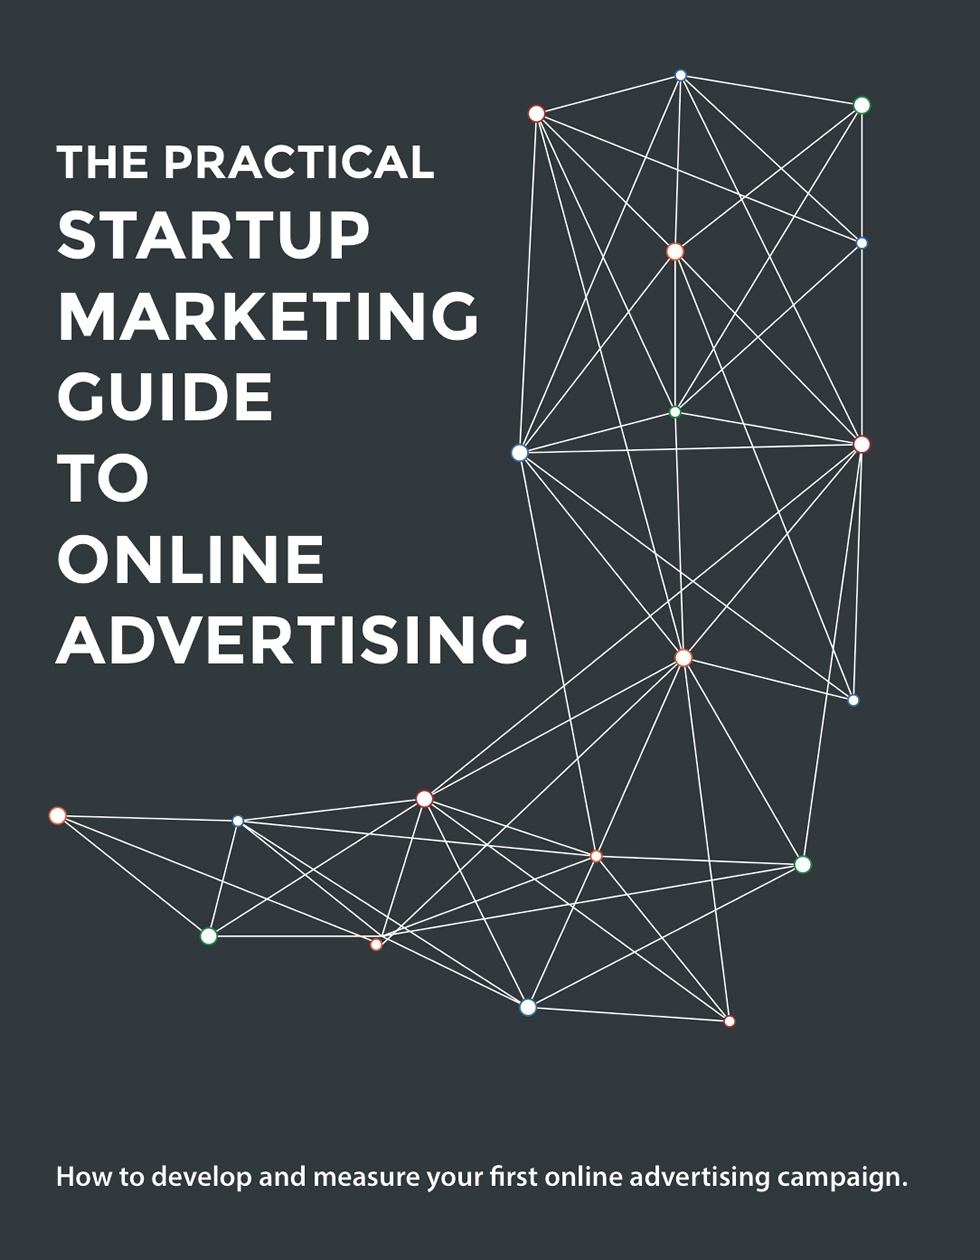 The Practical Startup Marketing Guide to Online Advertising